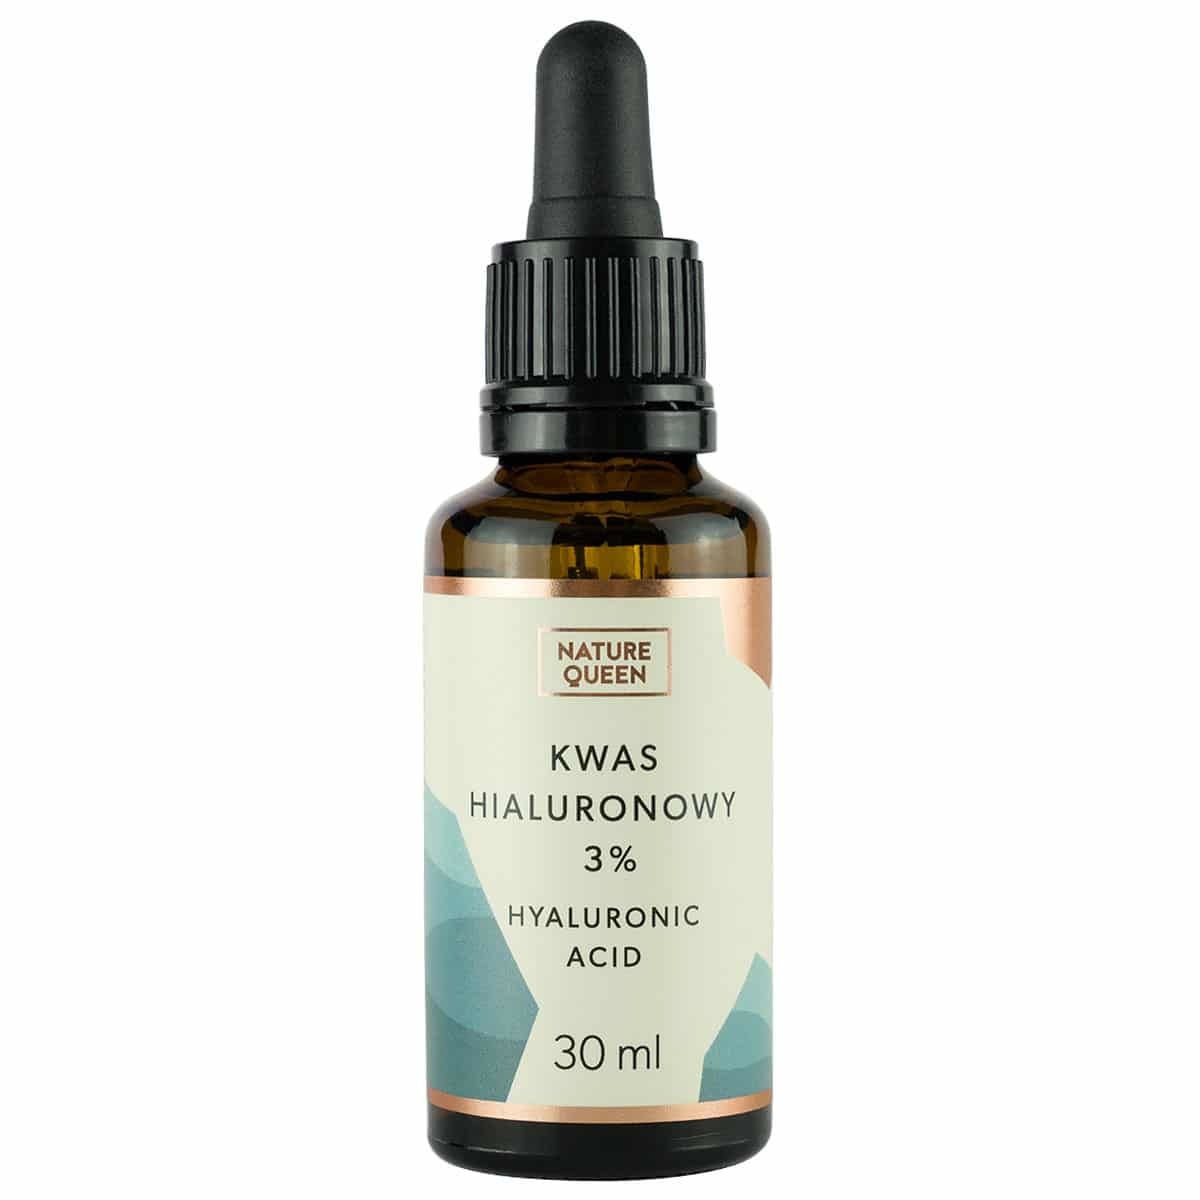 NATURE QUEEN KWAS HIALURONOWY 3%, 30 ML